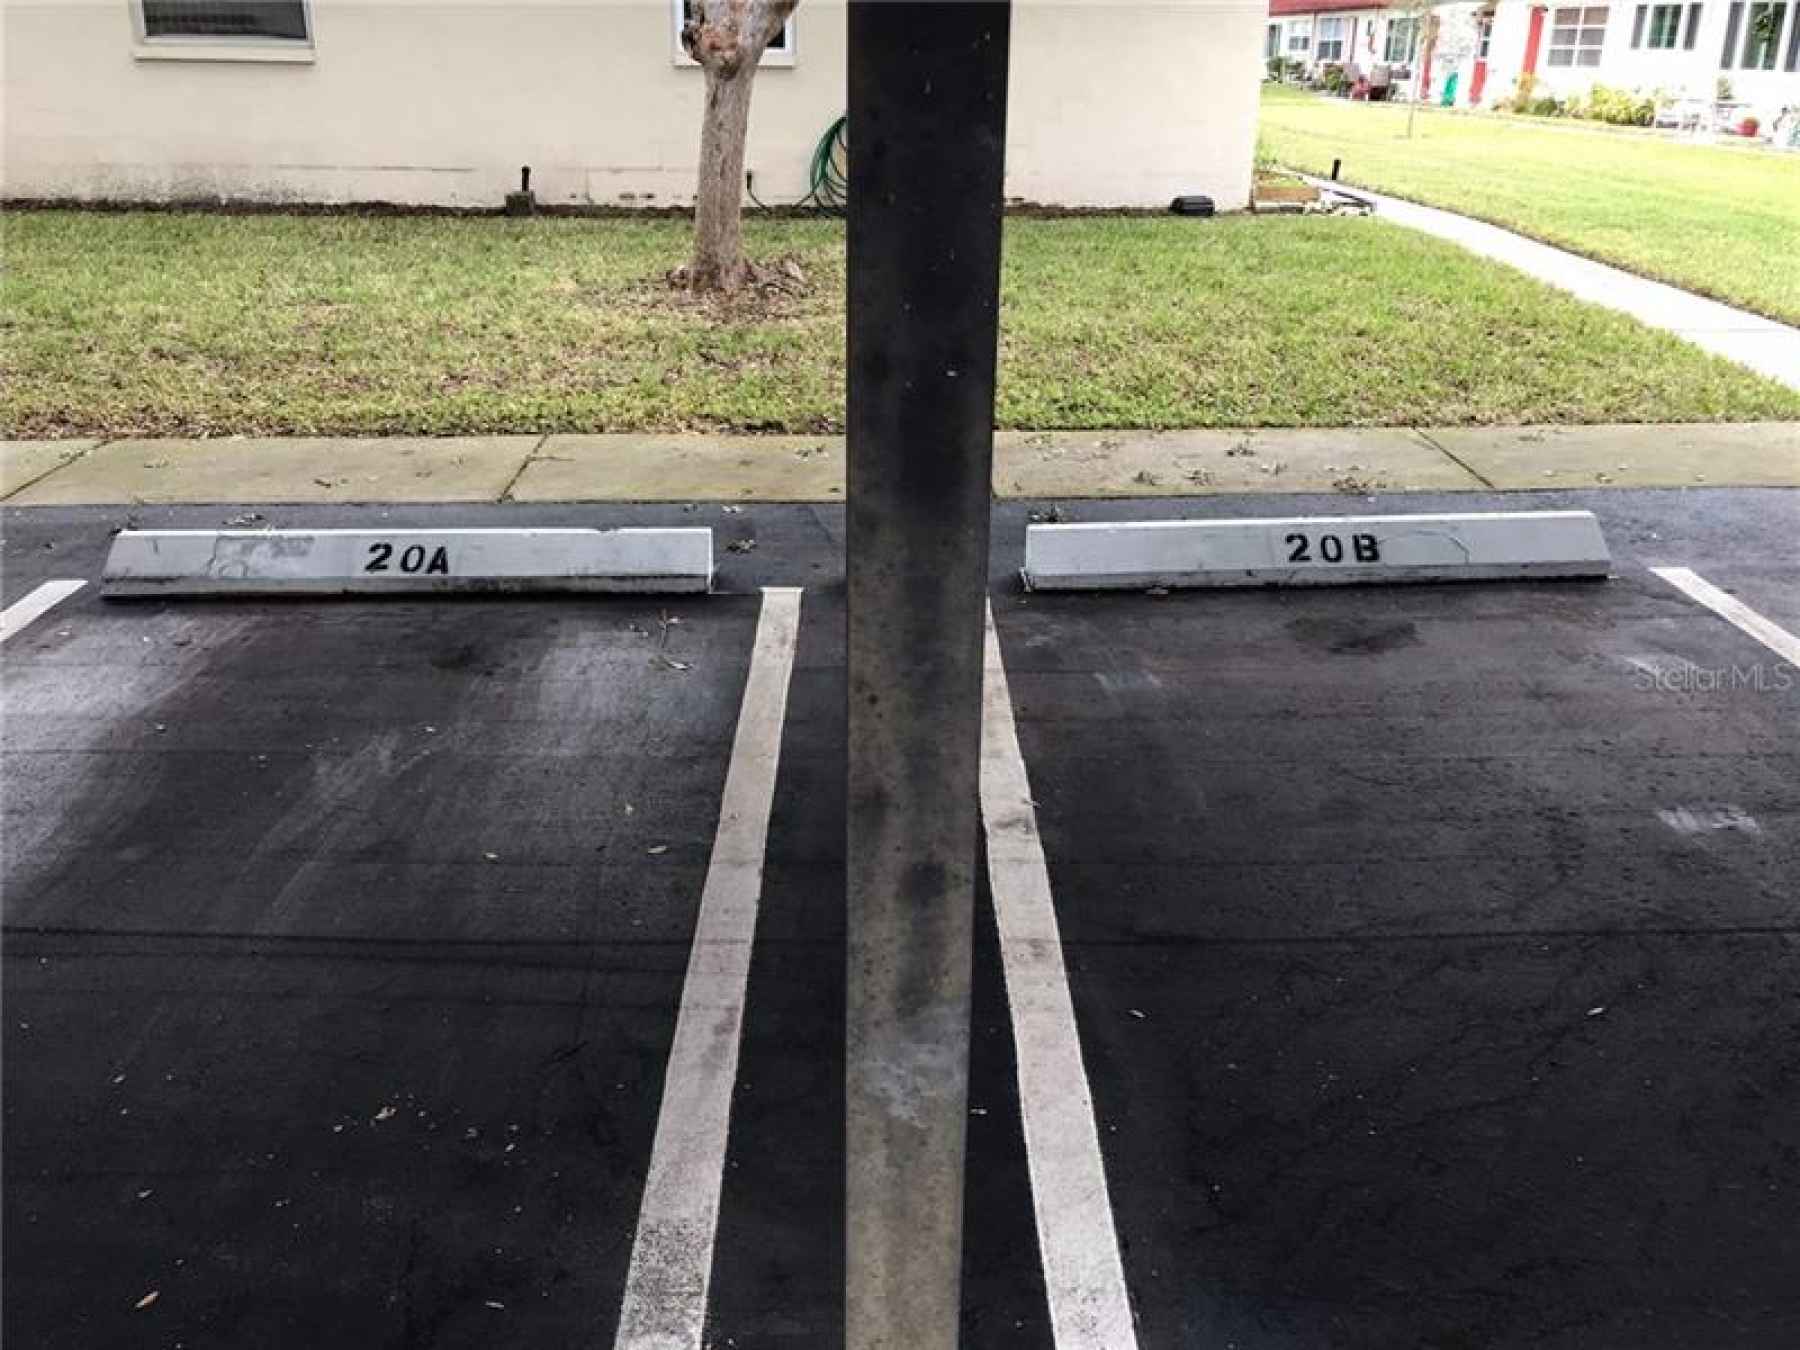 Assigned Carport spots #20A and #20B, and uncovered space #20 in front of unit = 3 assigned spots!